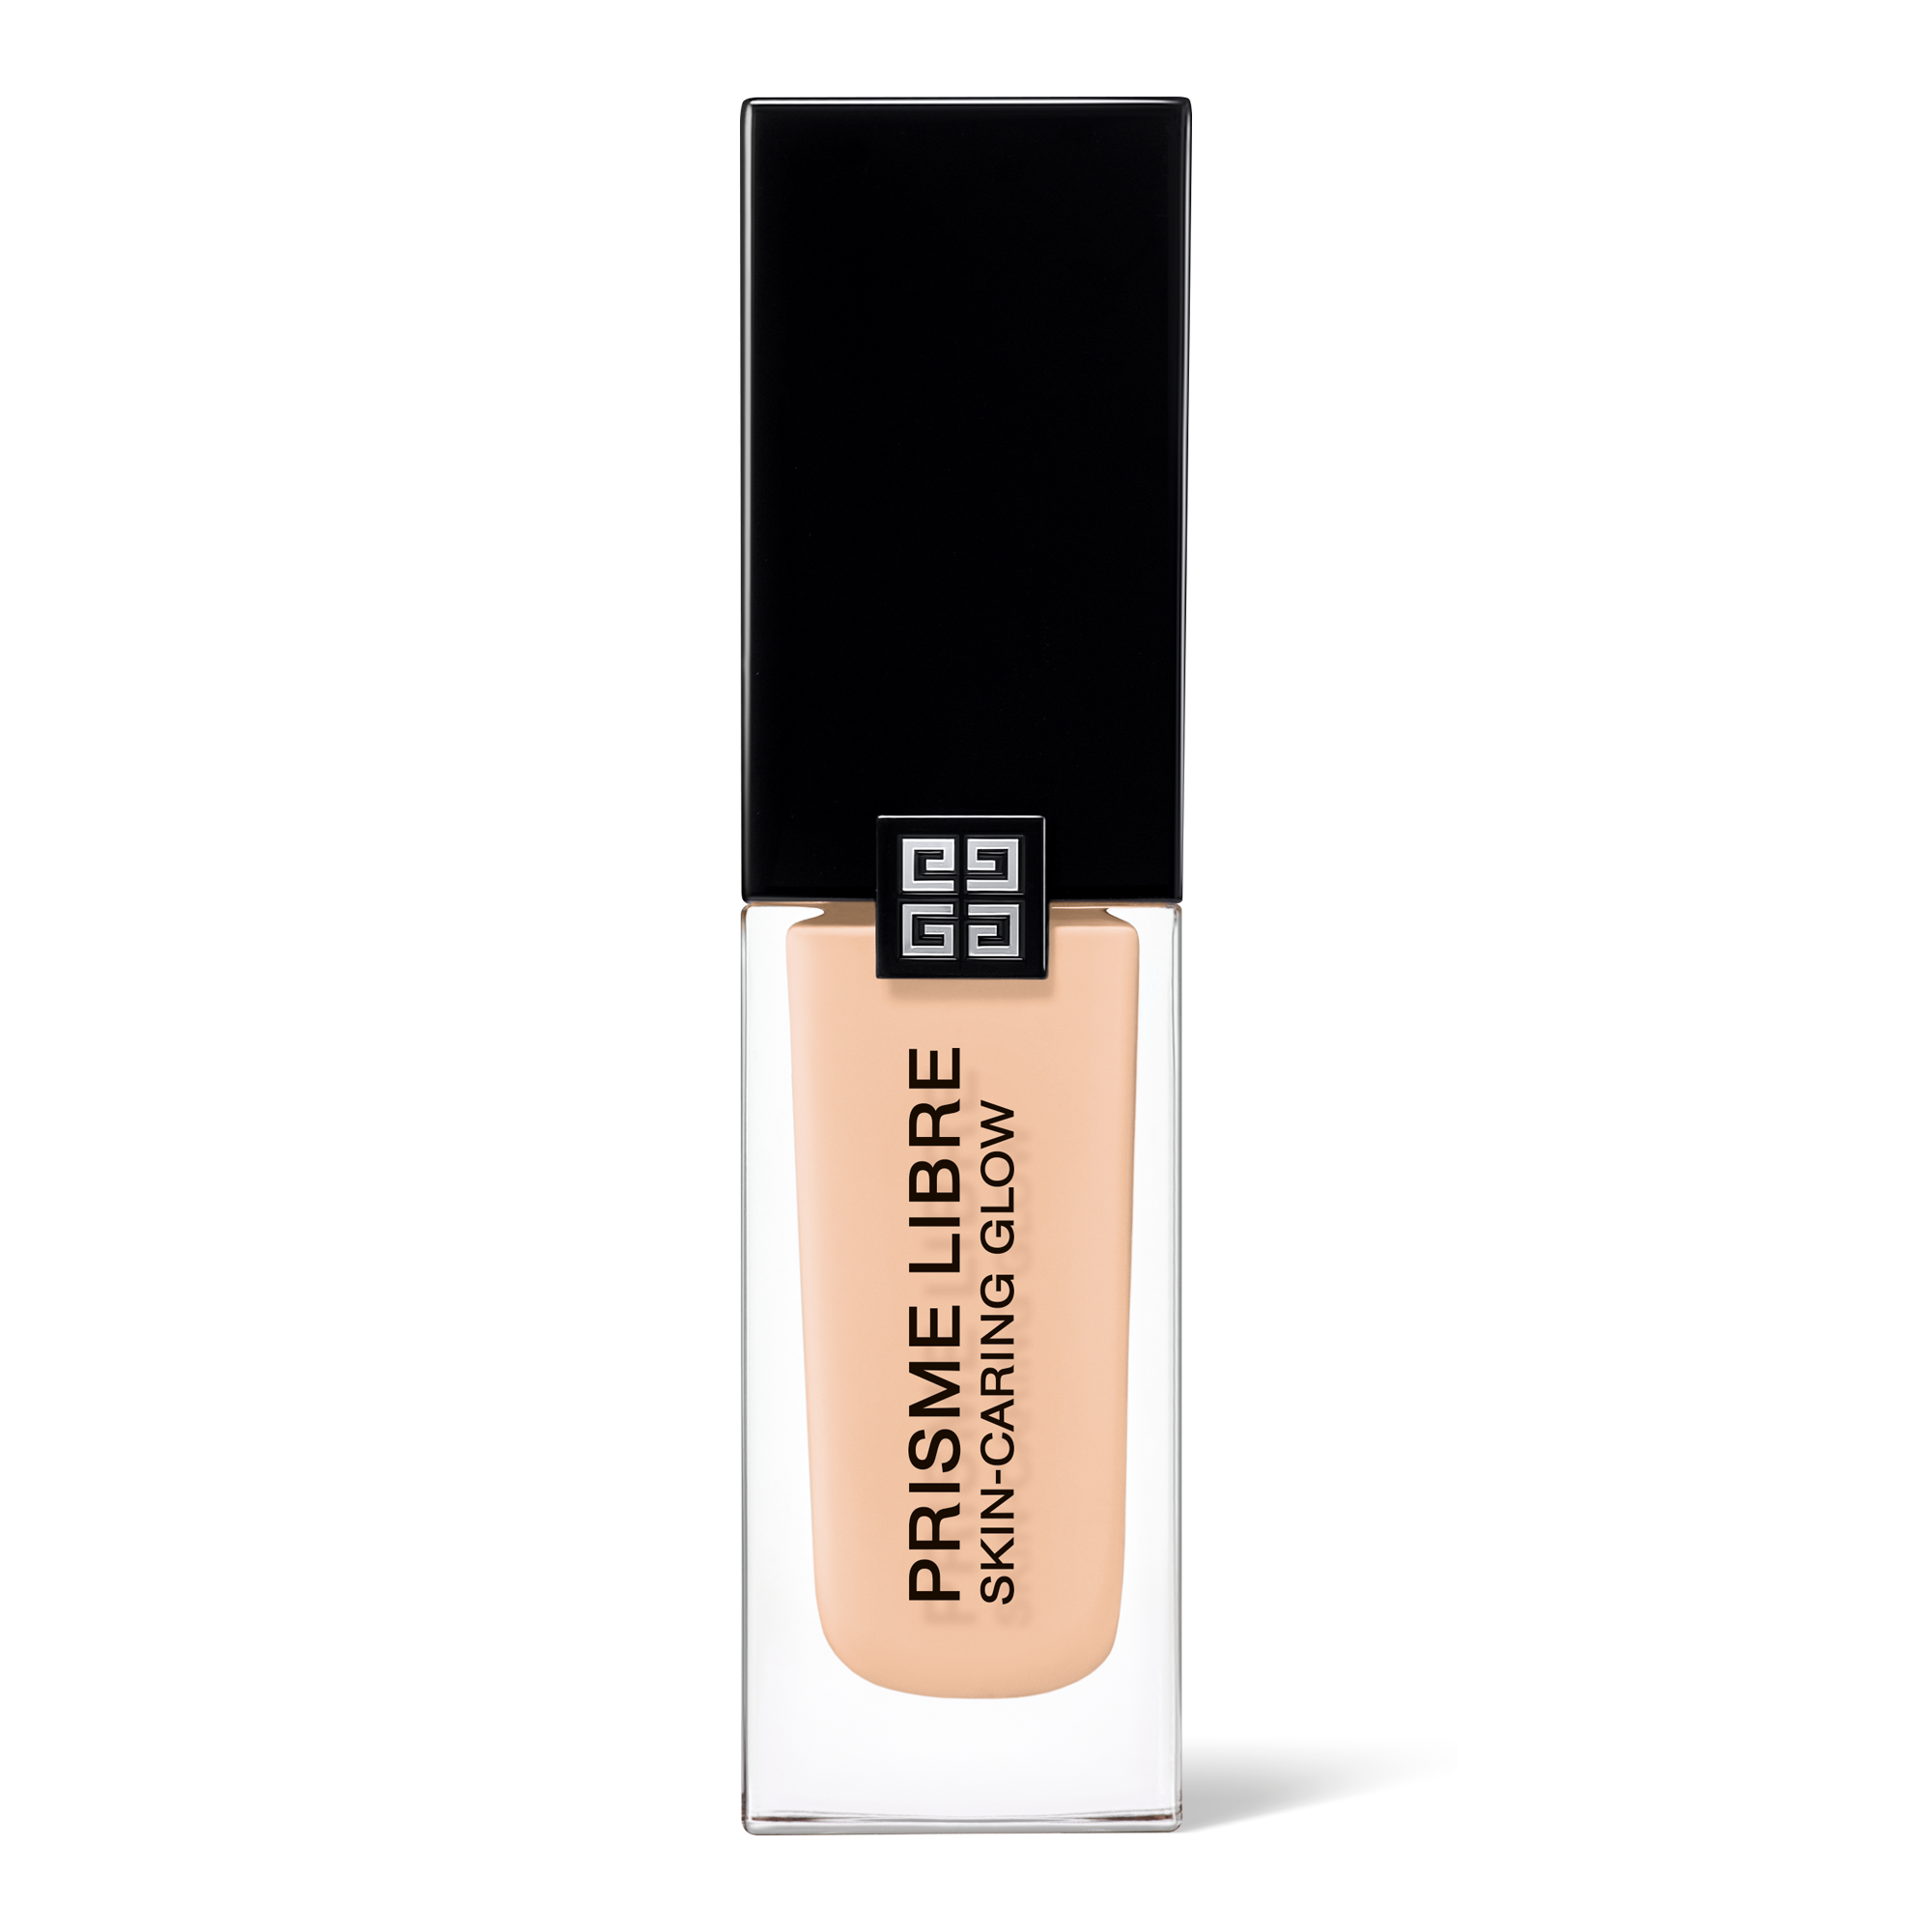 PRISME LIBRE SKIN-CARING GLOW HYDRATING FOUNDATION • Lightweight finish  foundation combined with hydrating skincare ∷ GIVENCHY